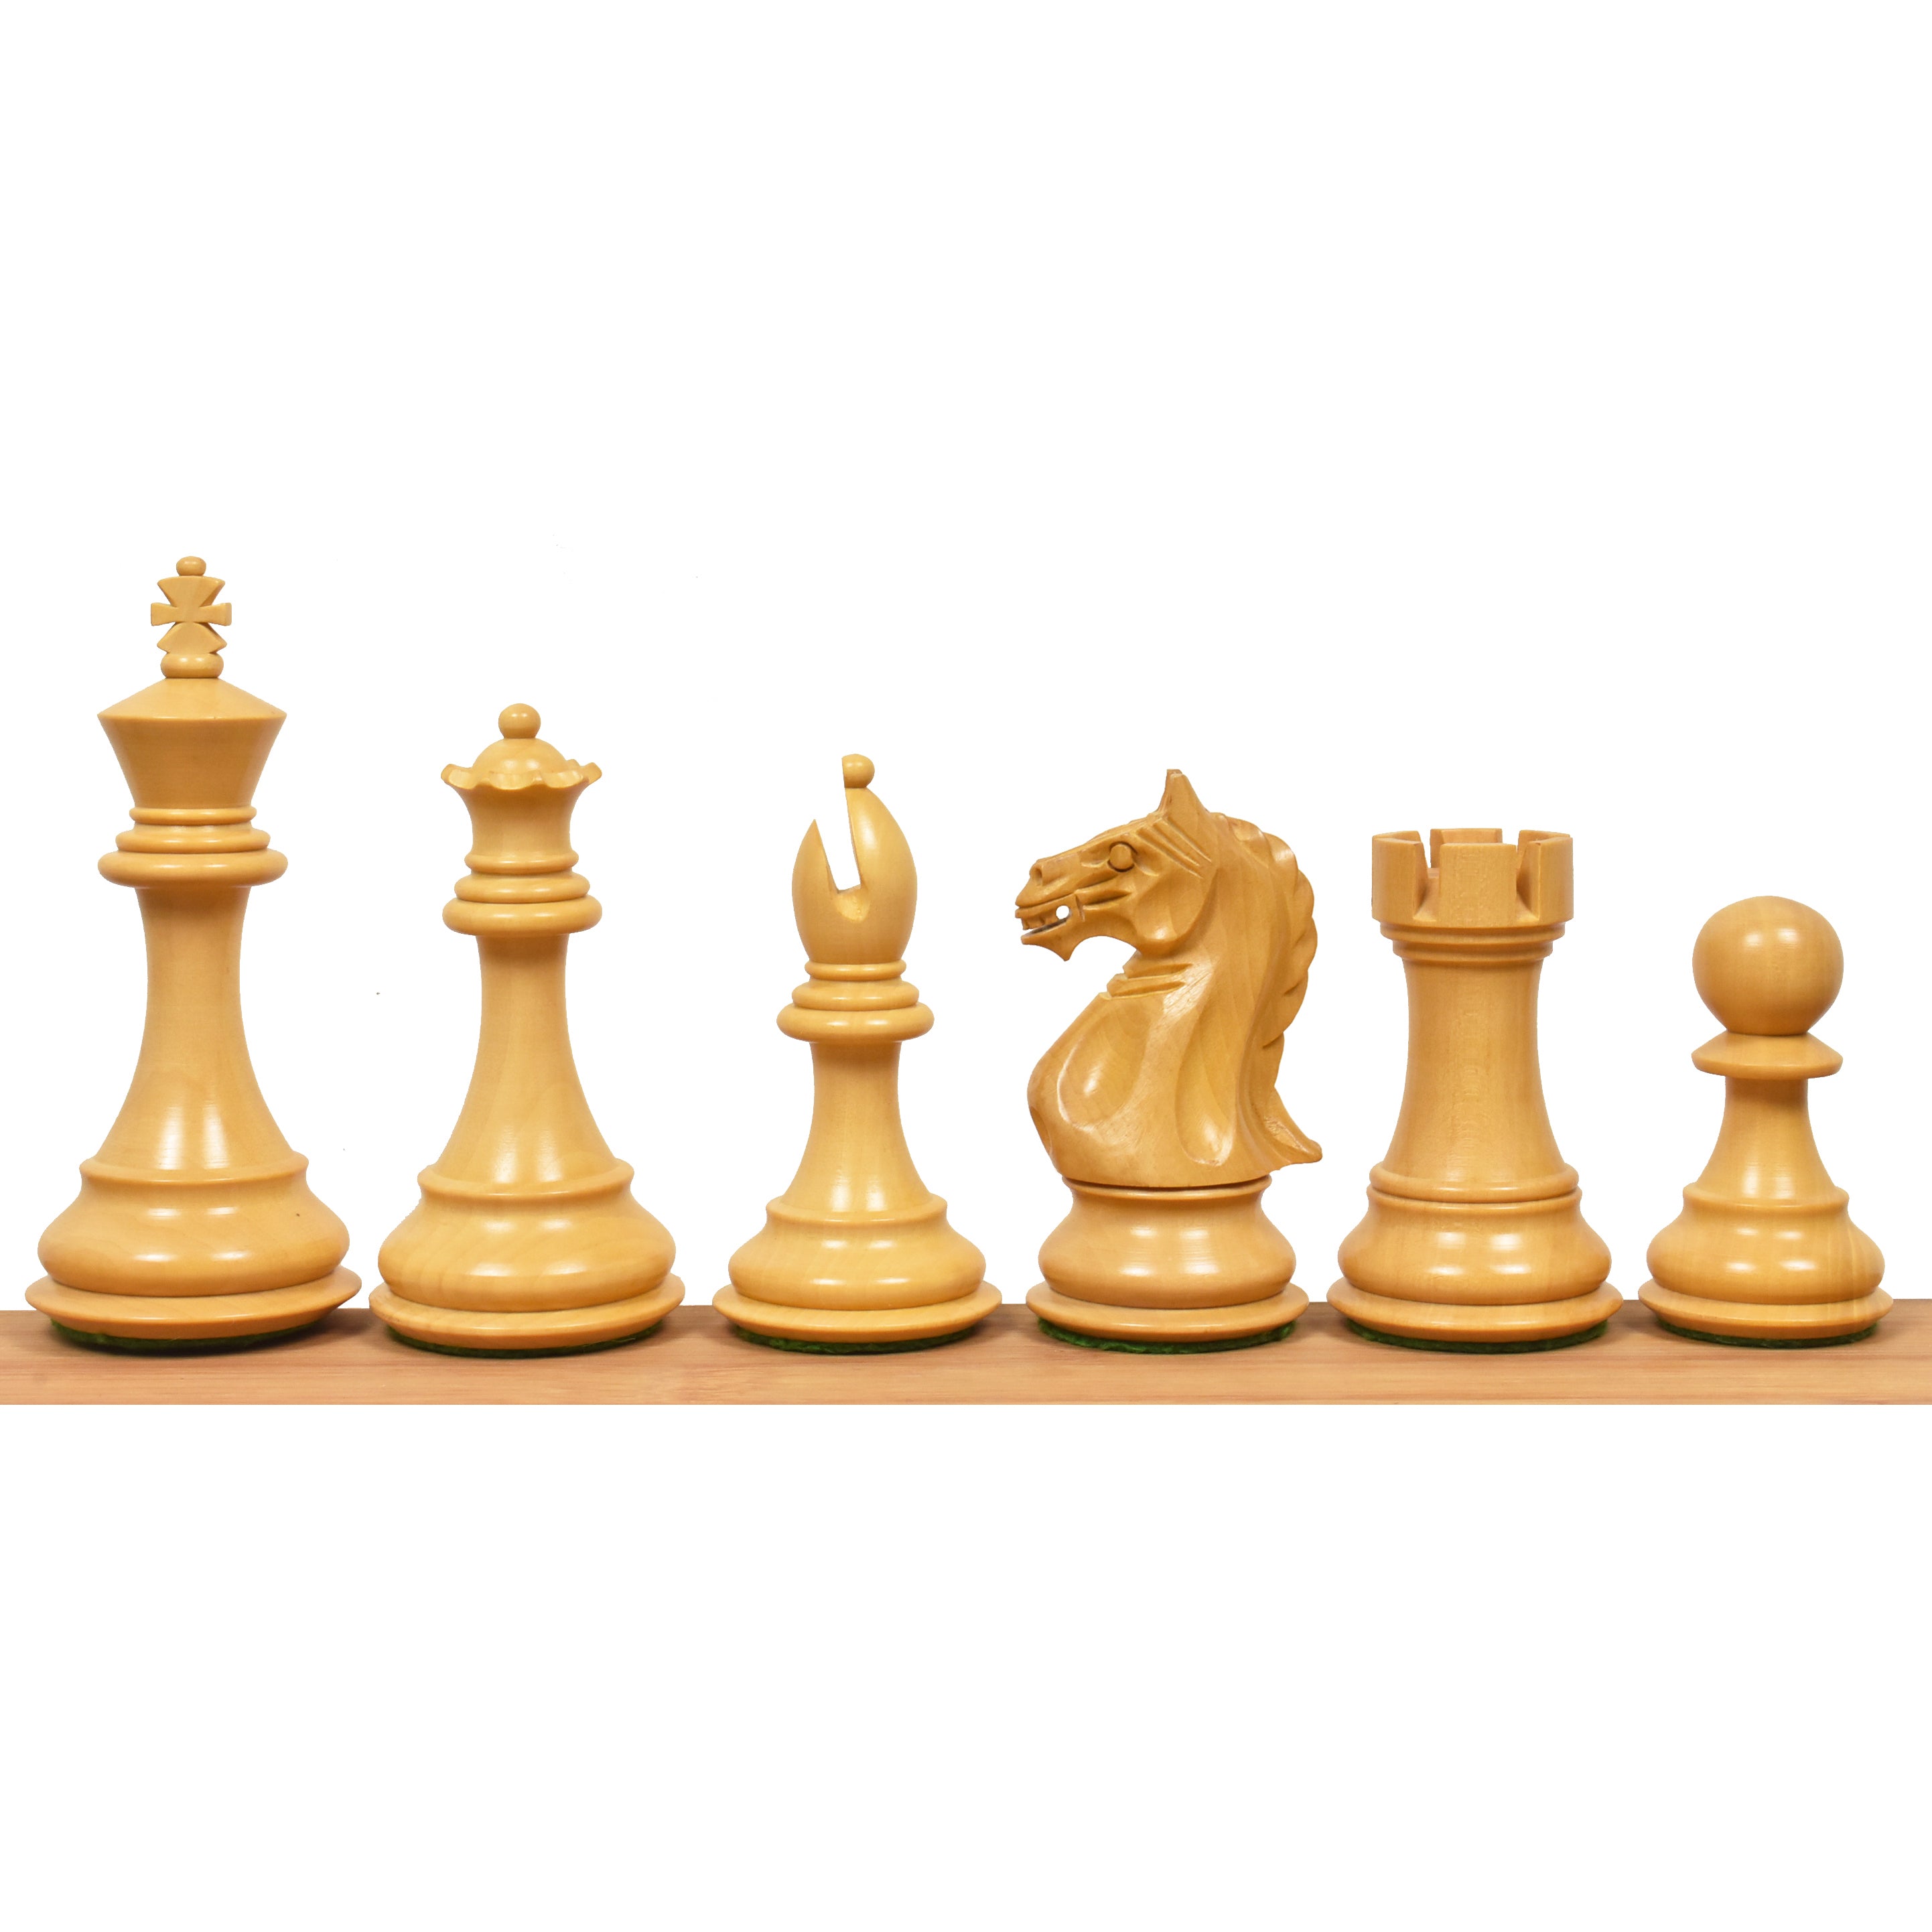 Slightly Imperfect 4" Ferocious Knight Staunton Chess Pieces Only set